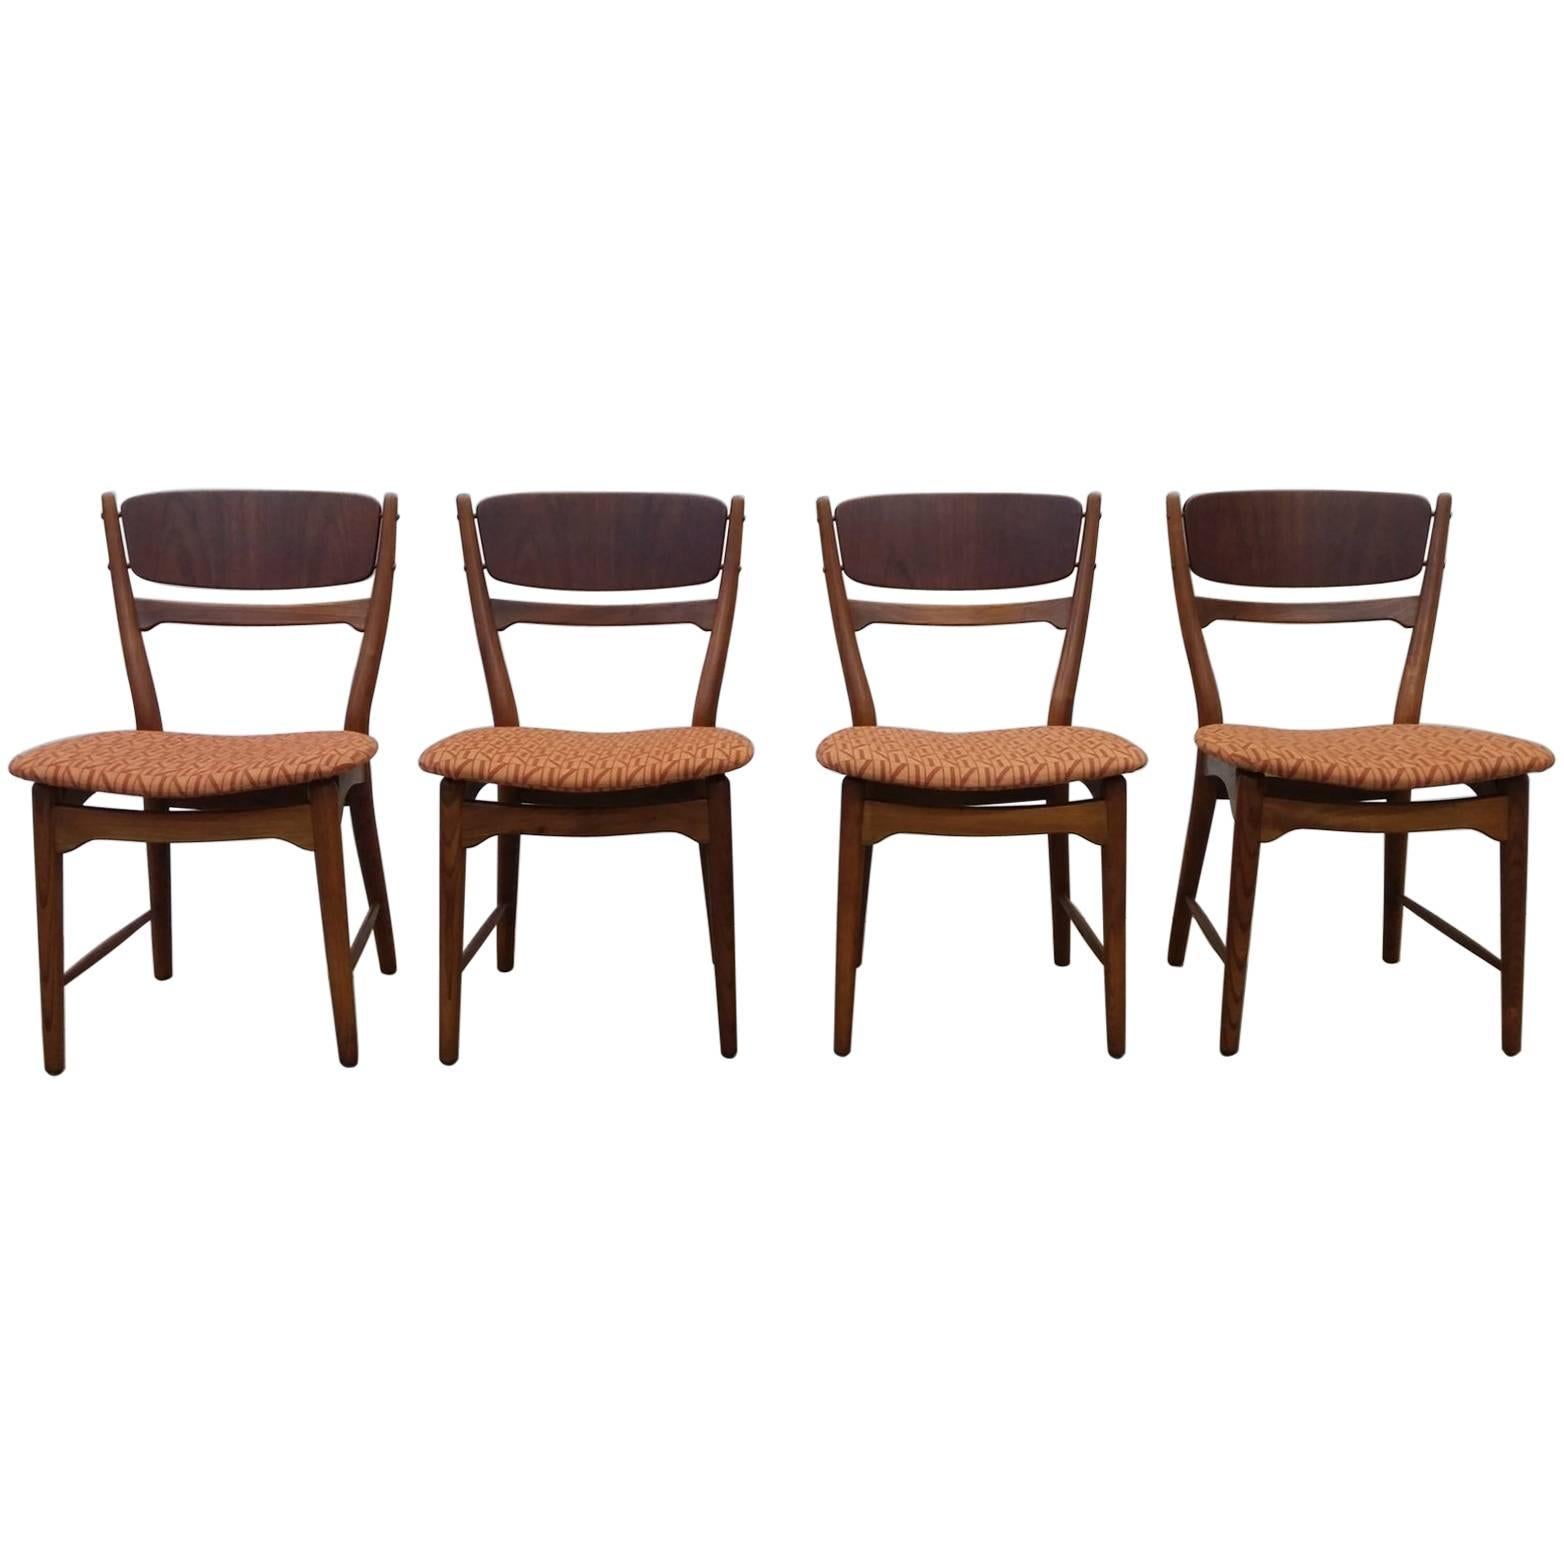 Set of Four Dining Chairs in Walnut and Teak, by Arne Wahl Iversen For Sale